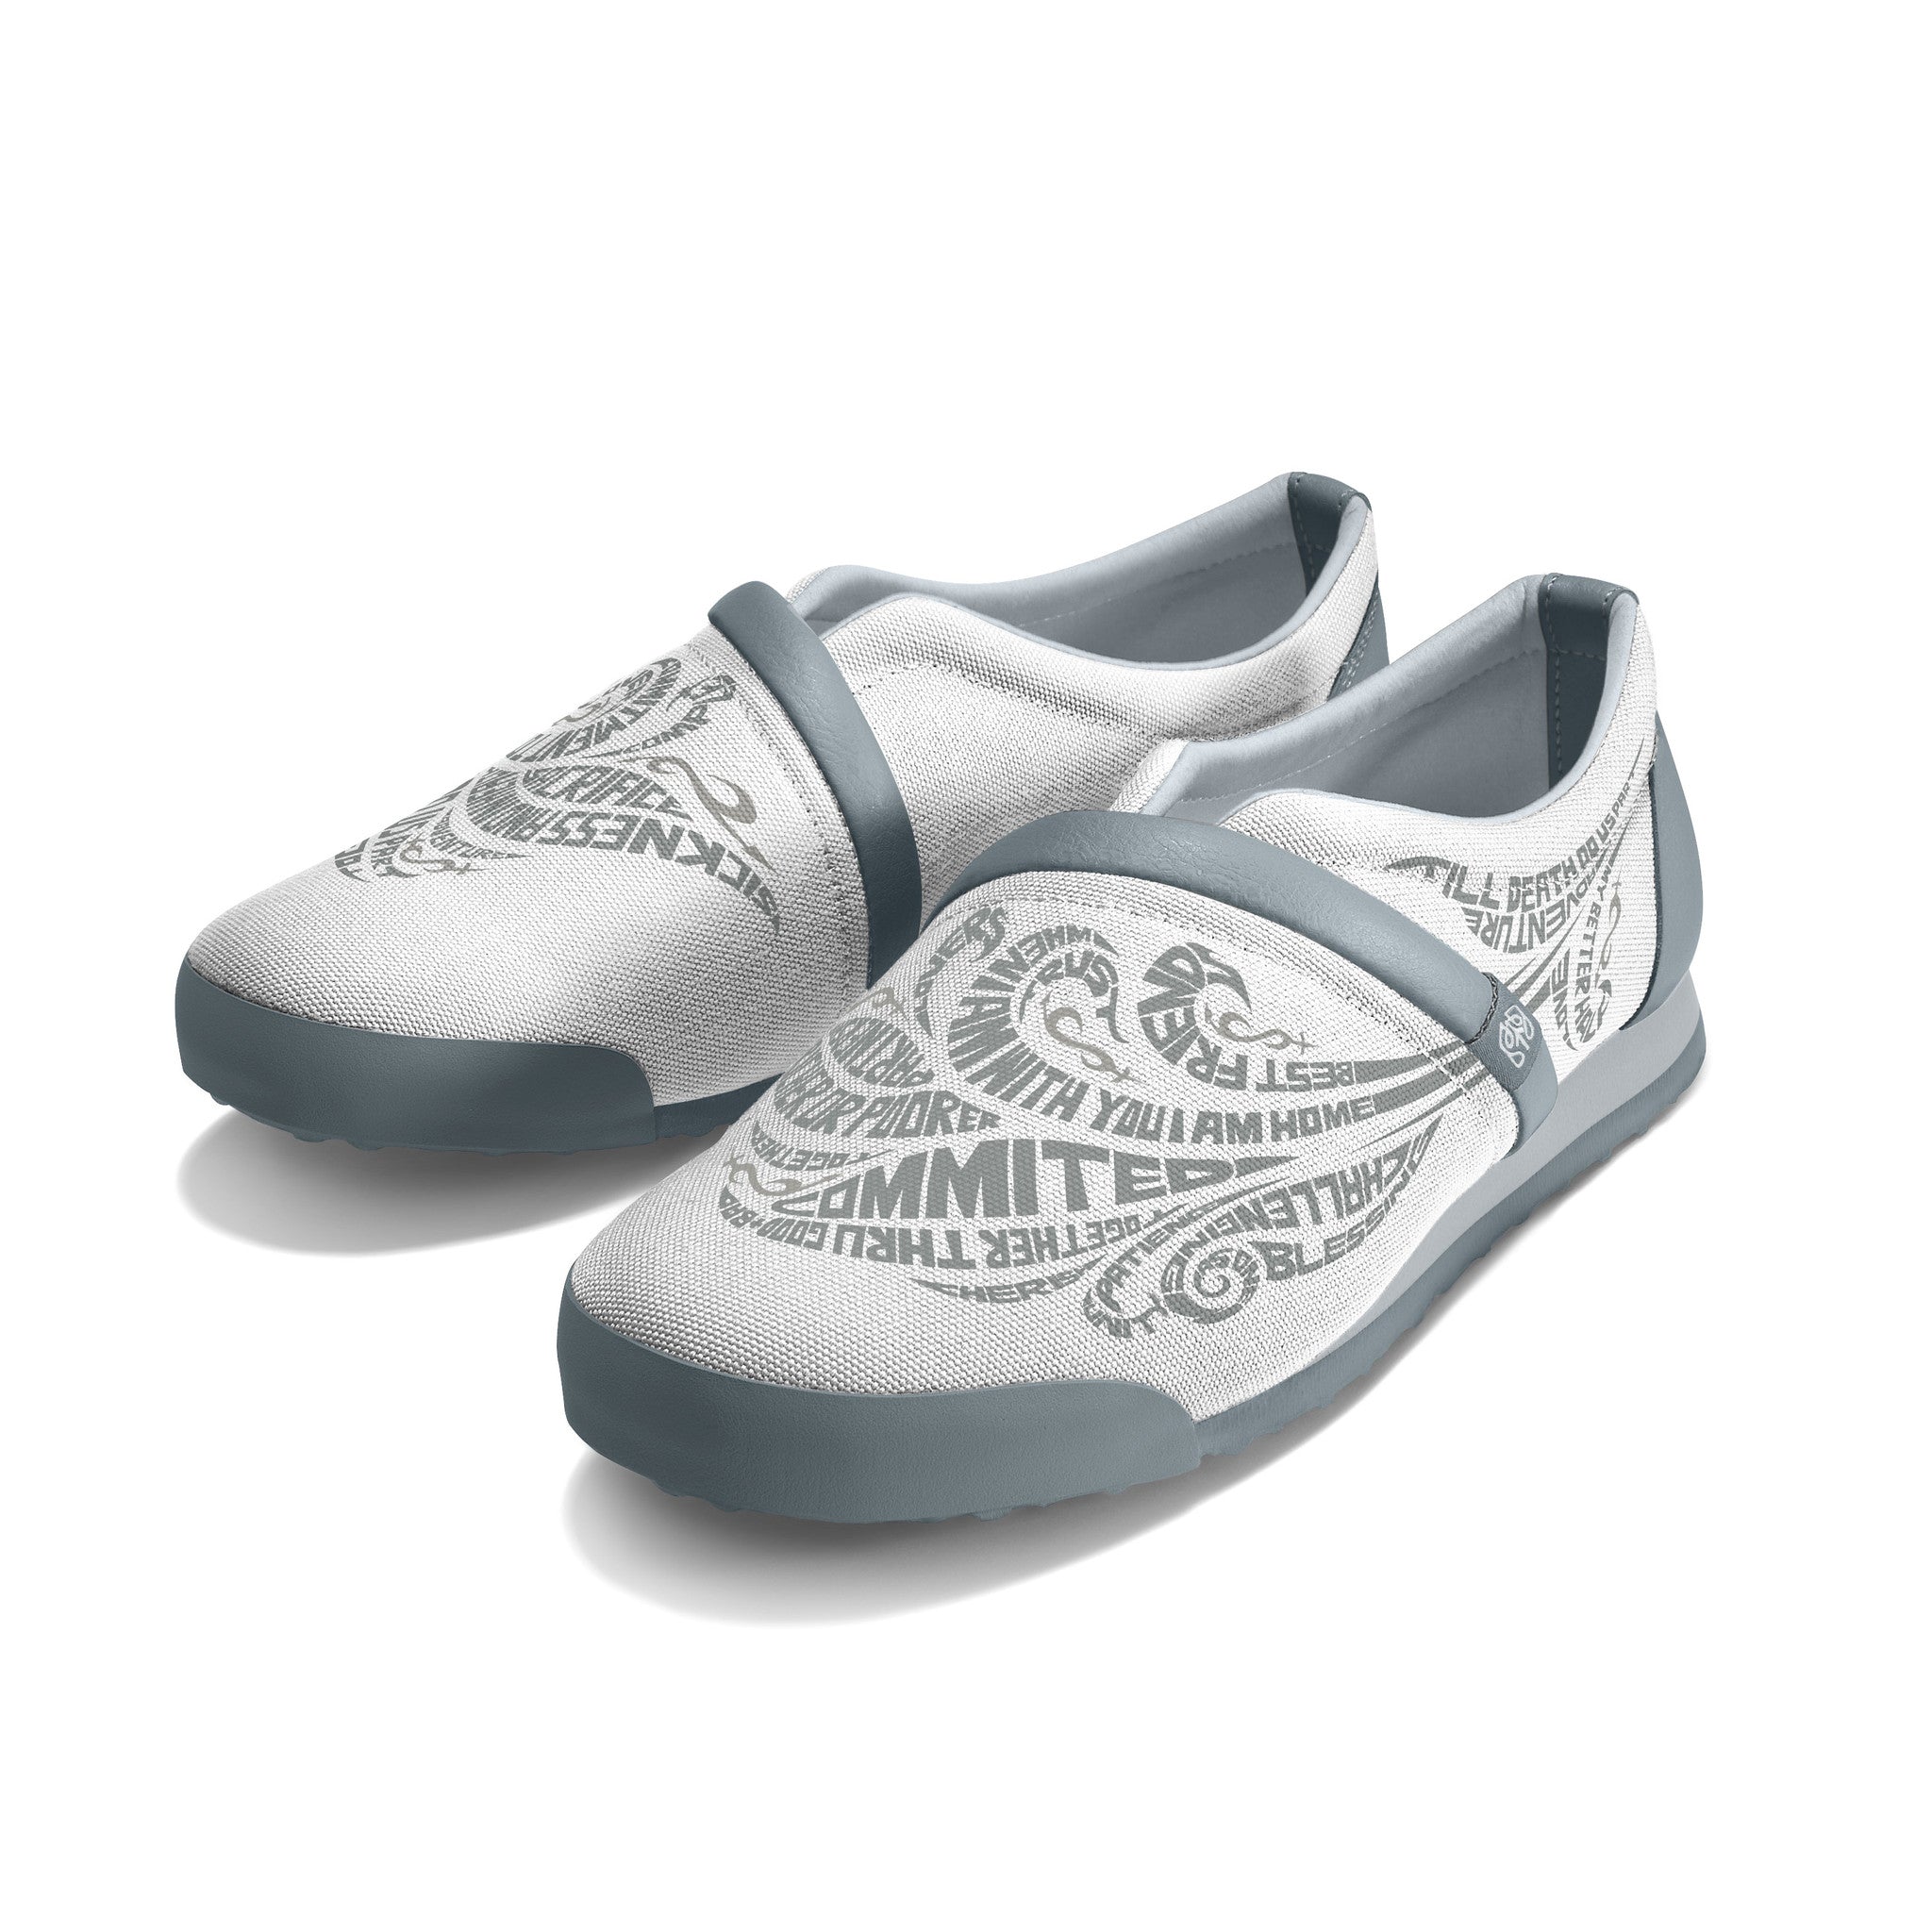 Bright_White - Common Ground Footwear Shoes Left Perspective View